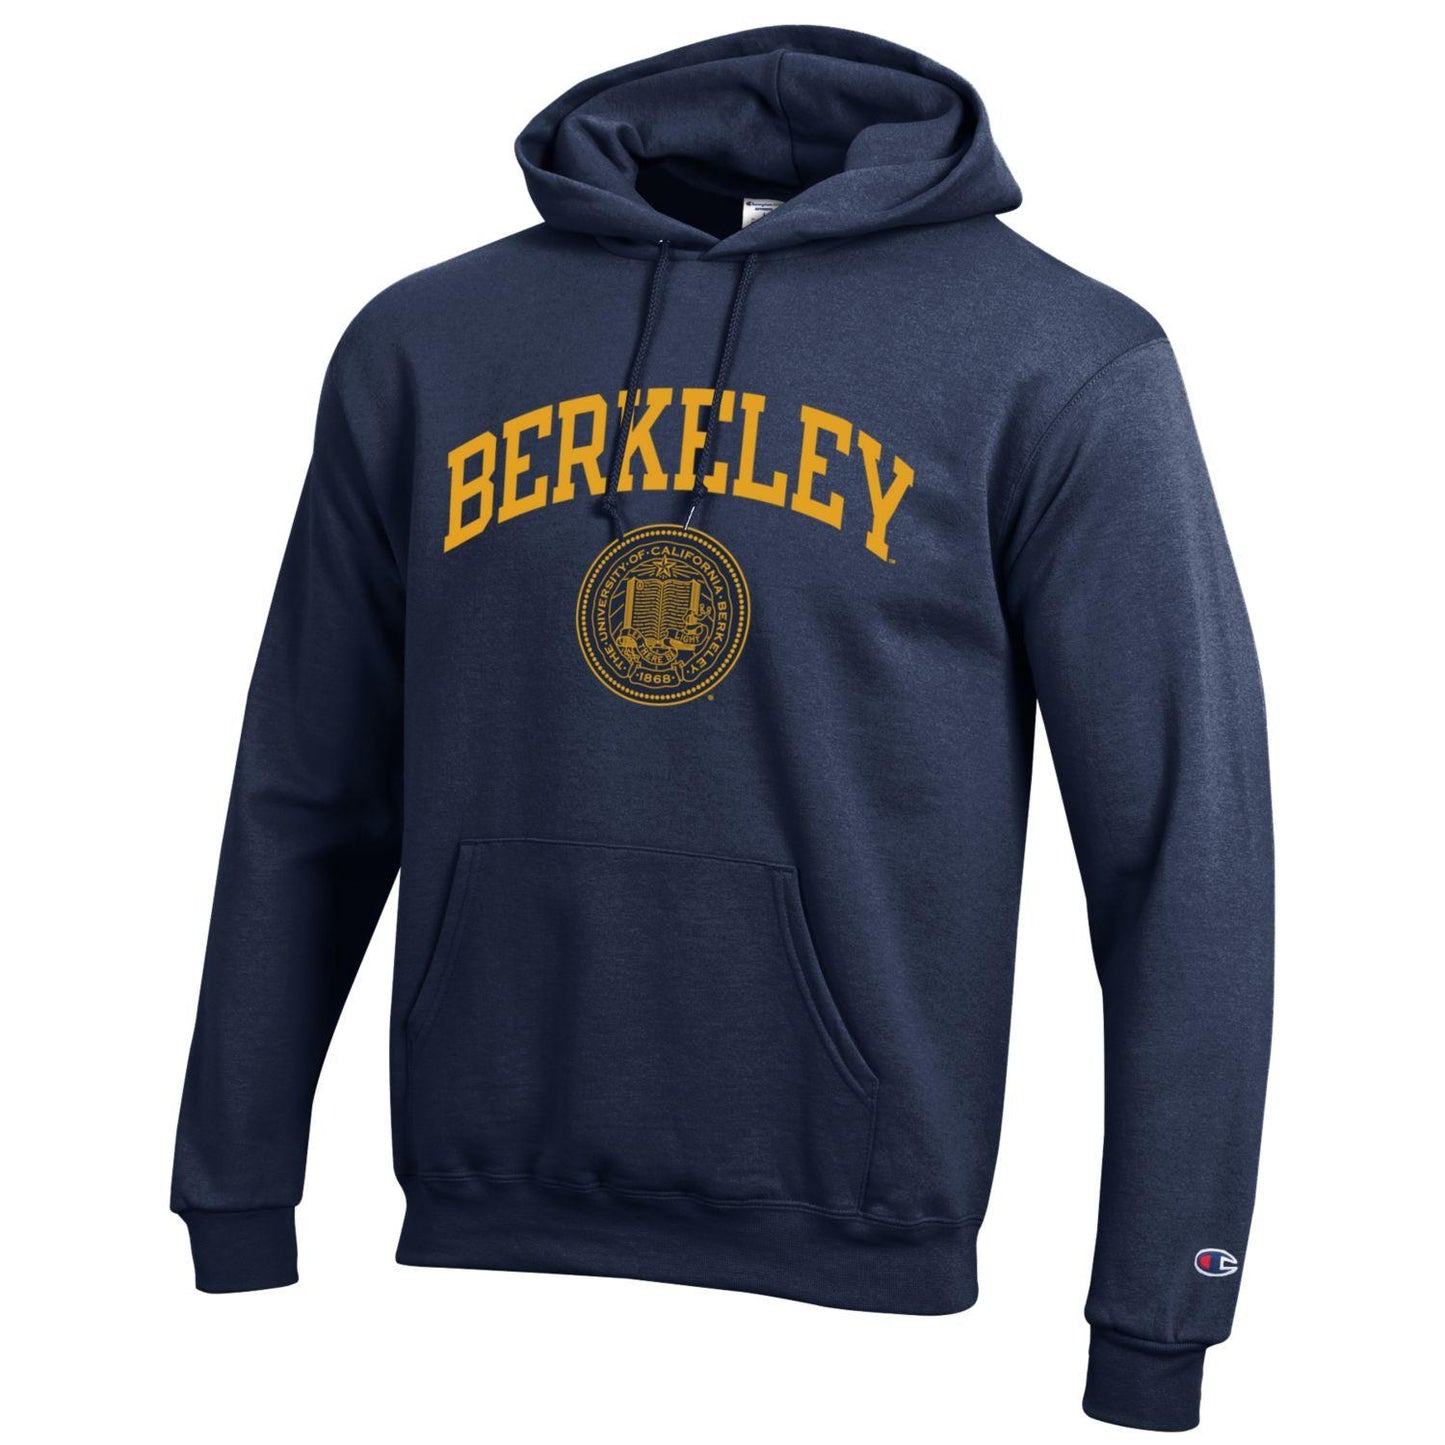 – arch University Sweats Shop seal California of Champion Wear hoodie College and Berkeley